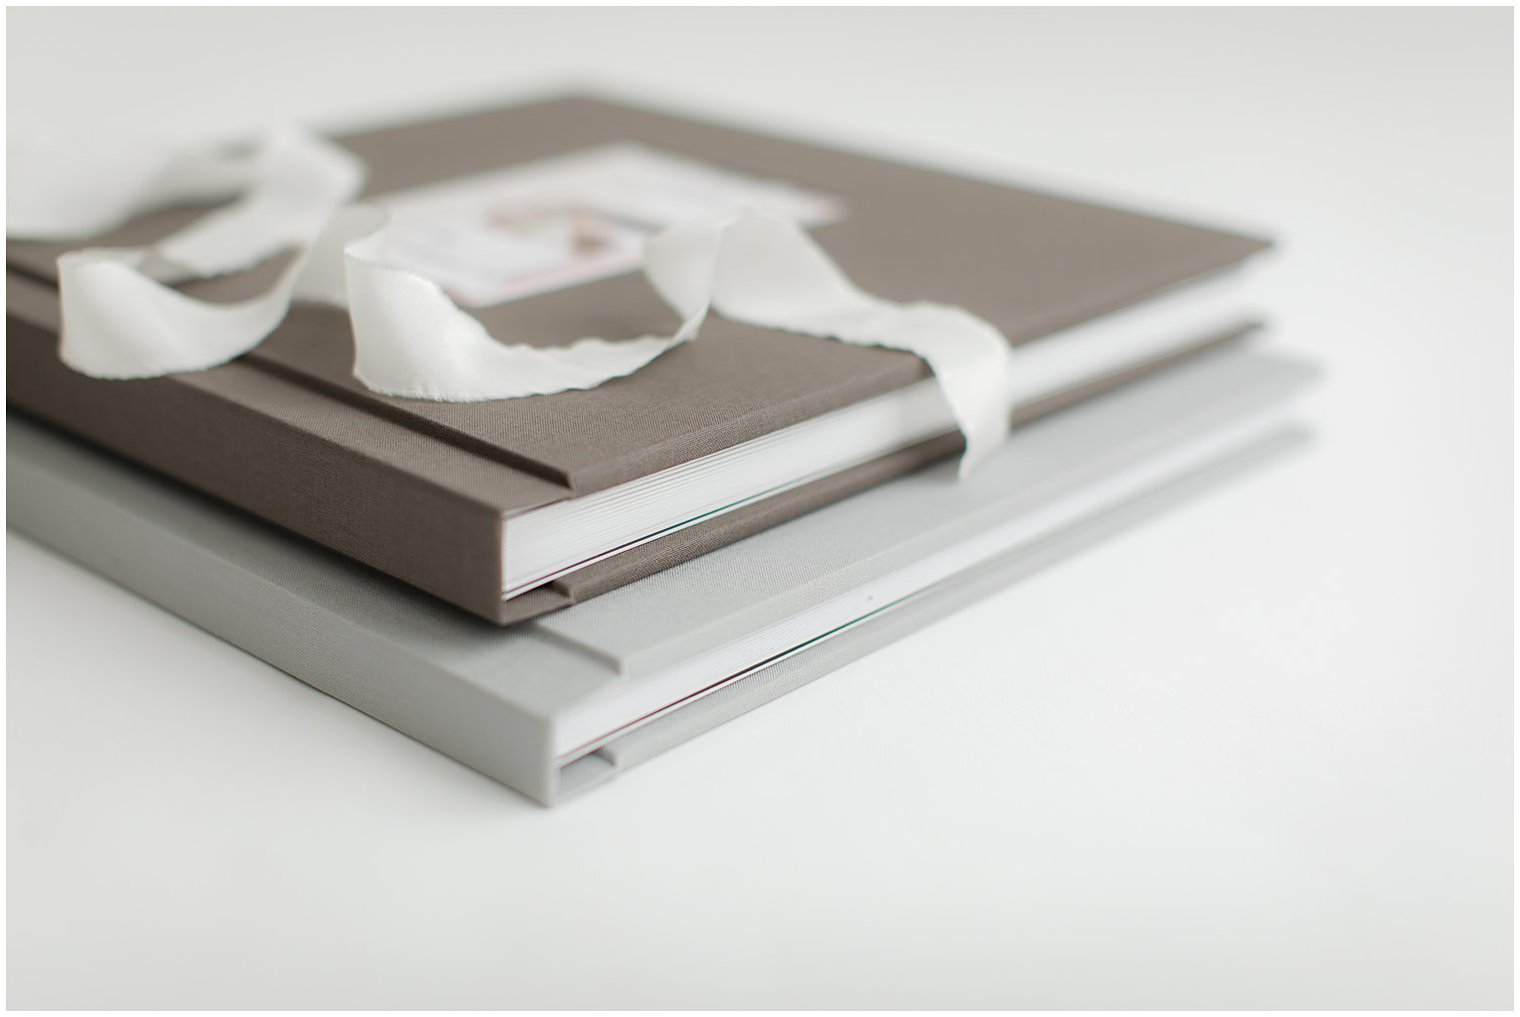 Linen album with inset cover photo 